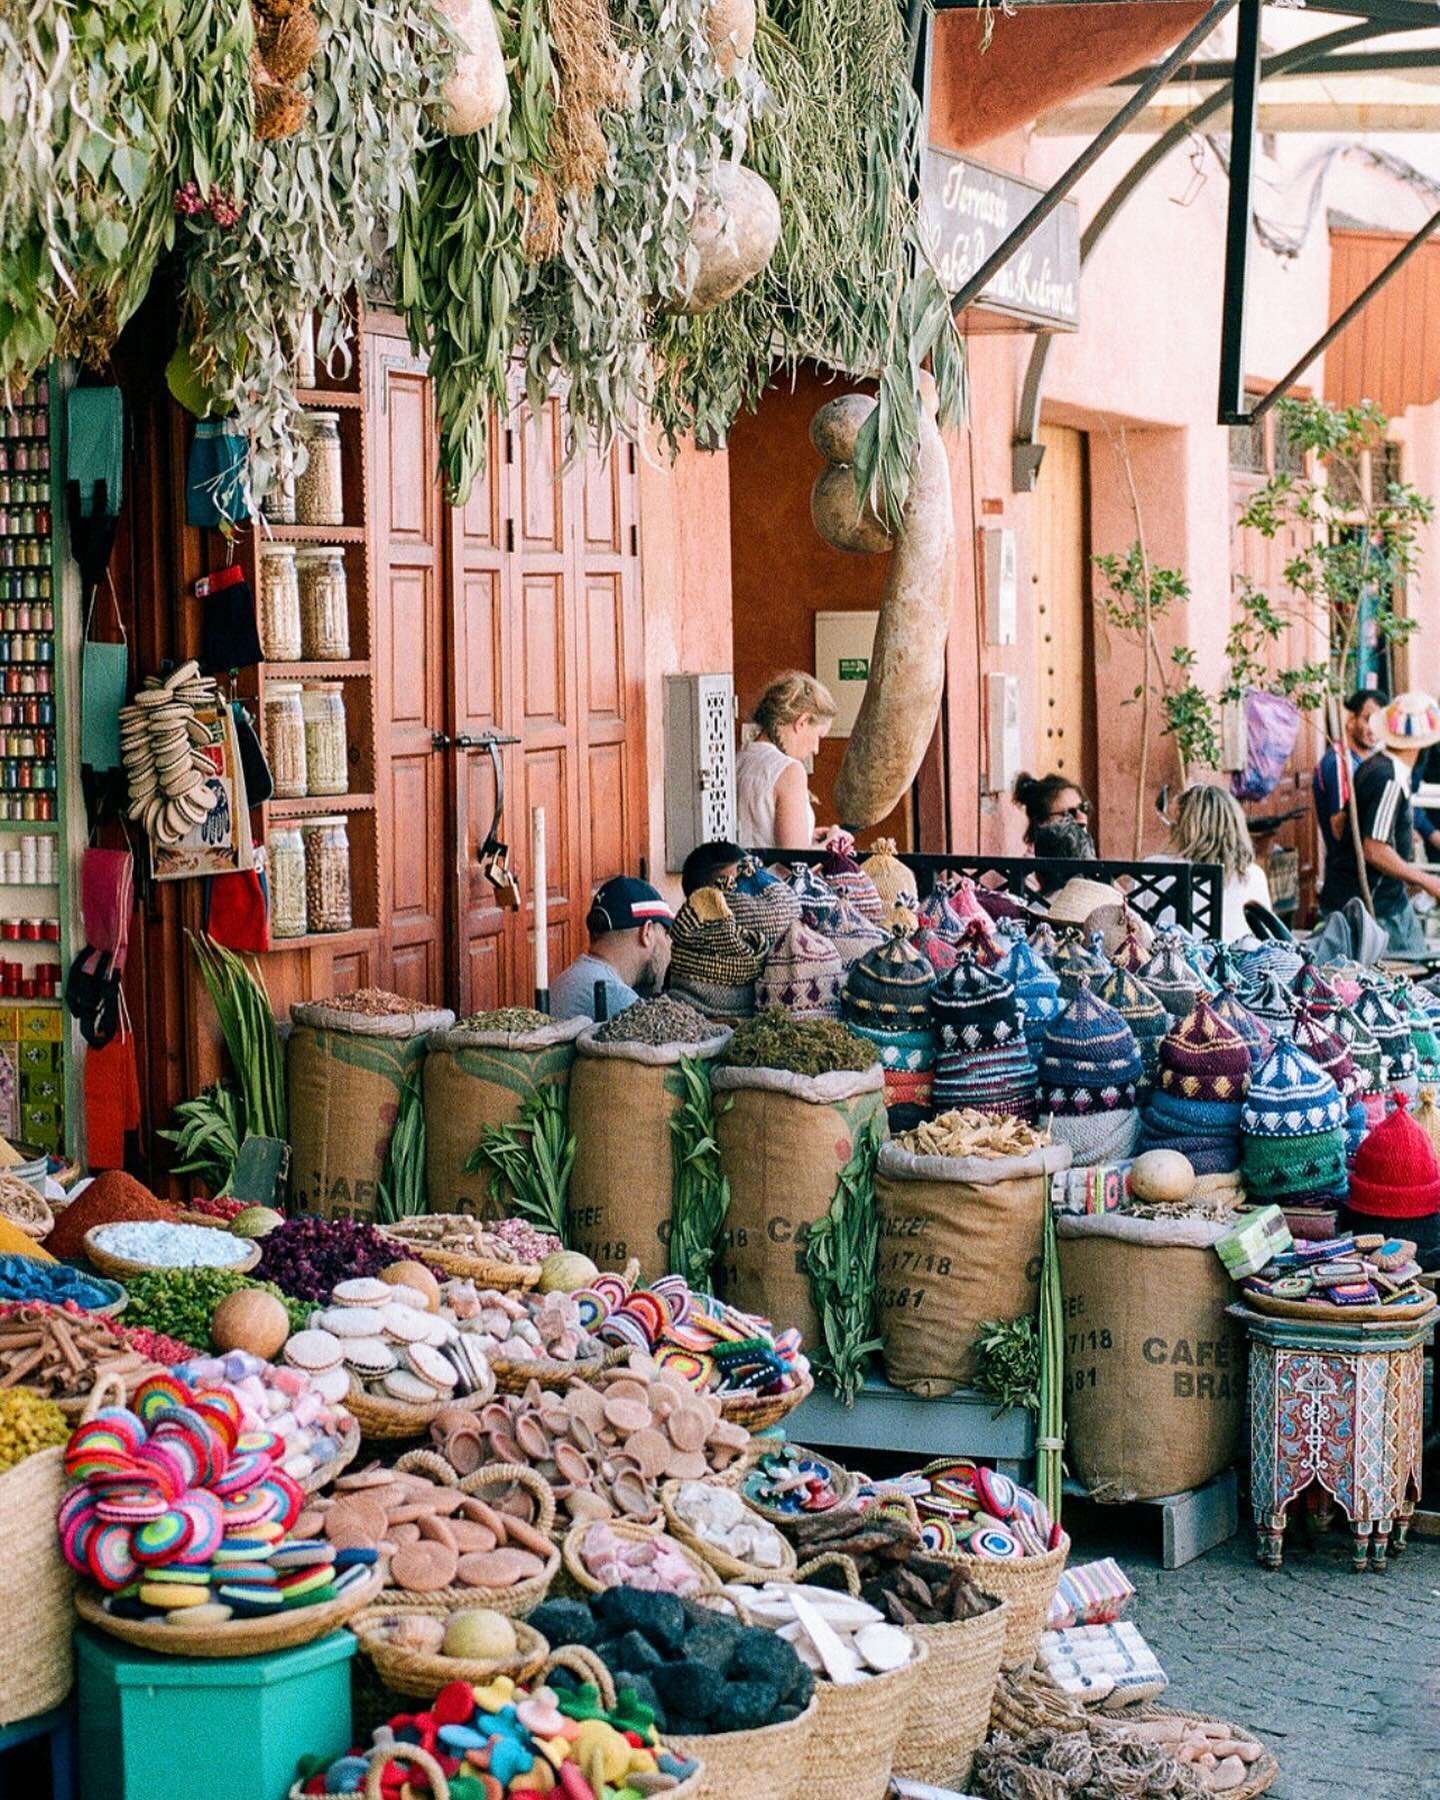 Controversial opinion: I enjoyed Fez much more than I enjoyed Marrakech. 🫣  Both cities are so full of color, vibrancy, movement and texture - such an utterly fascinating country.

What&rsquo;s on your travel list for 2024?

All shot on 35 mm #kodak